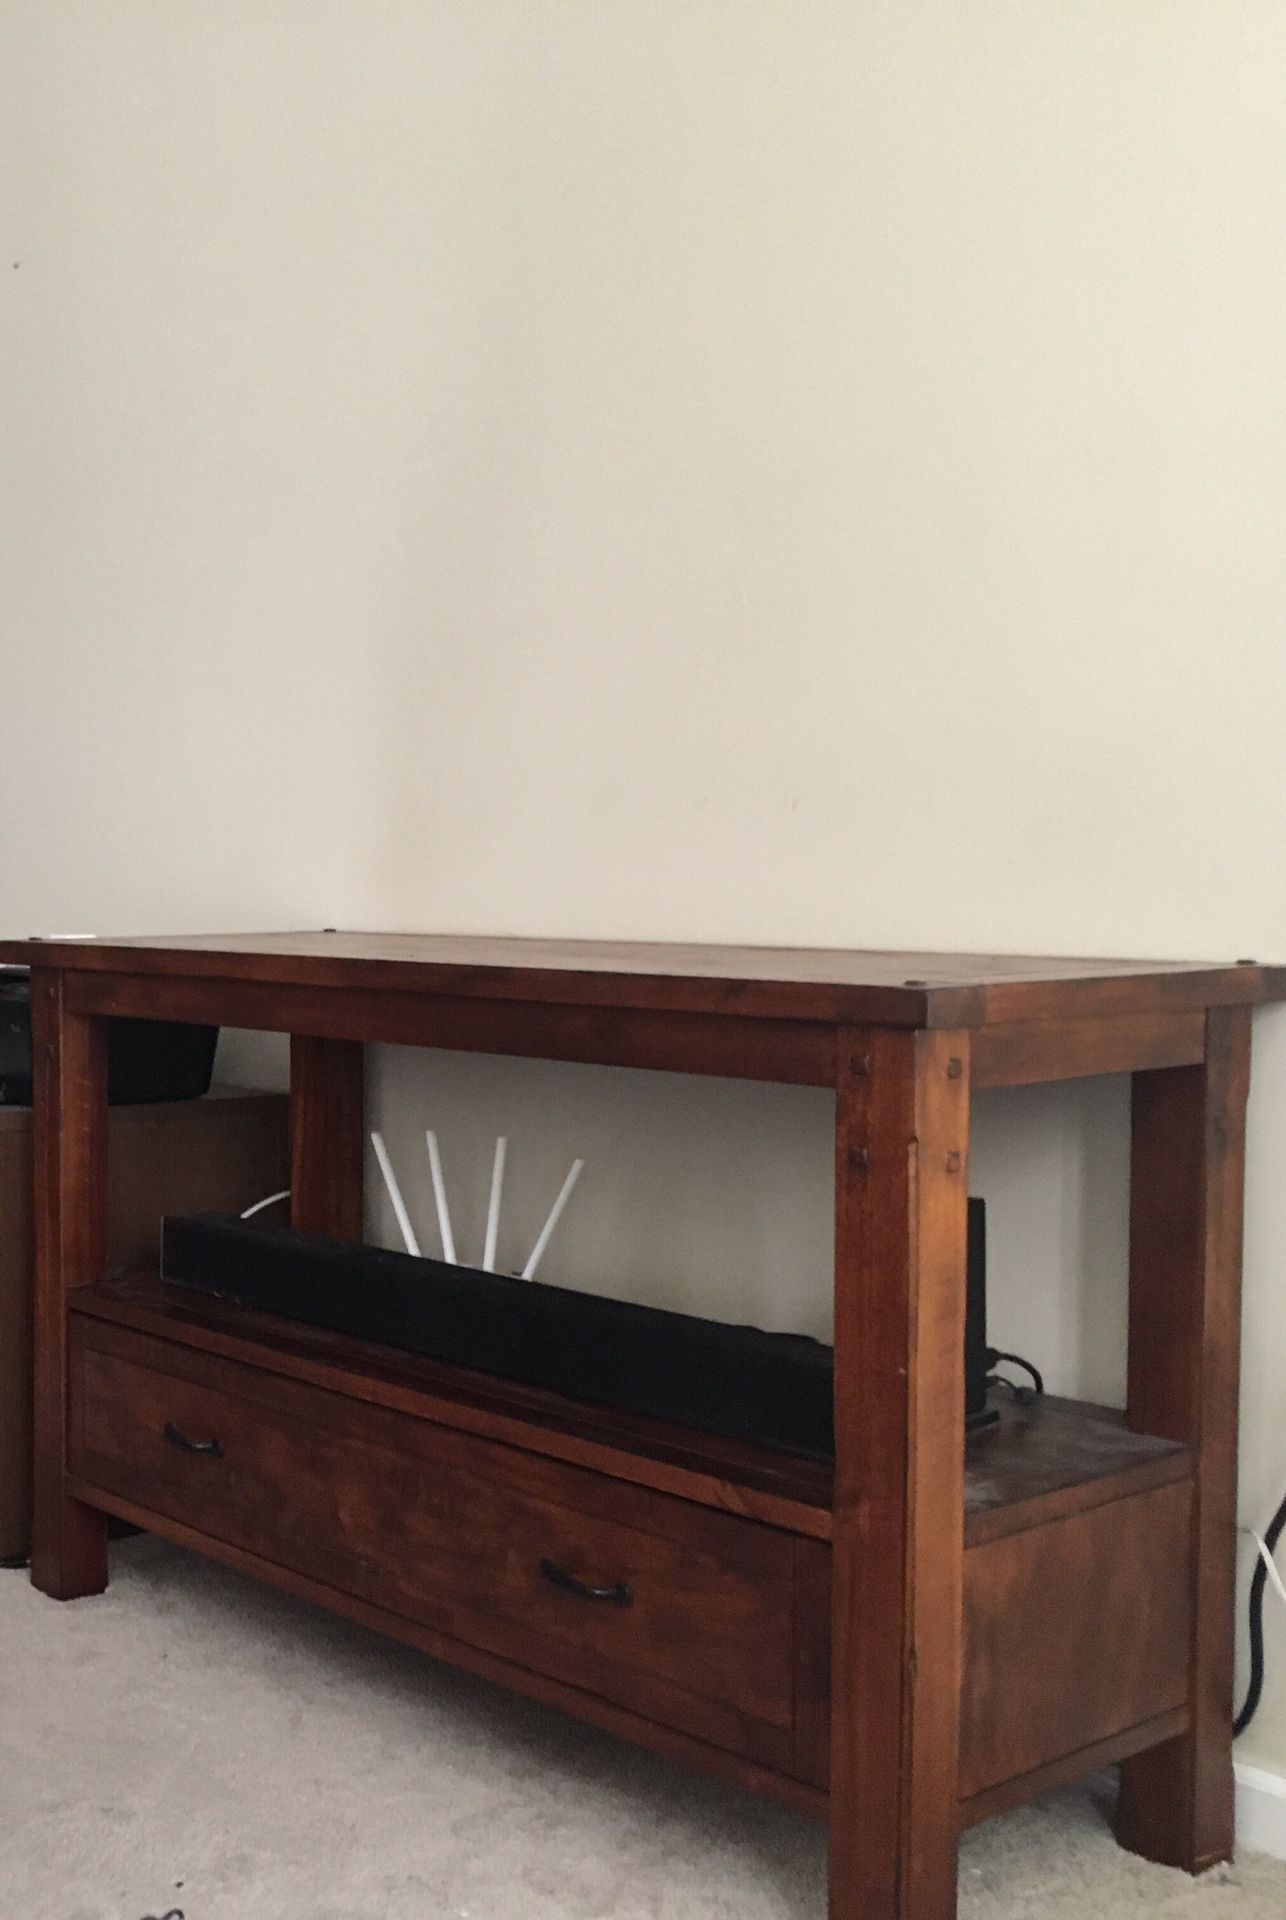 TV Entertainment Stand with chord storage and shelf